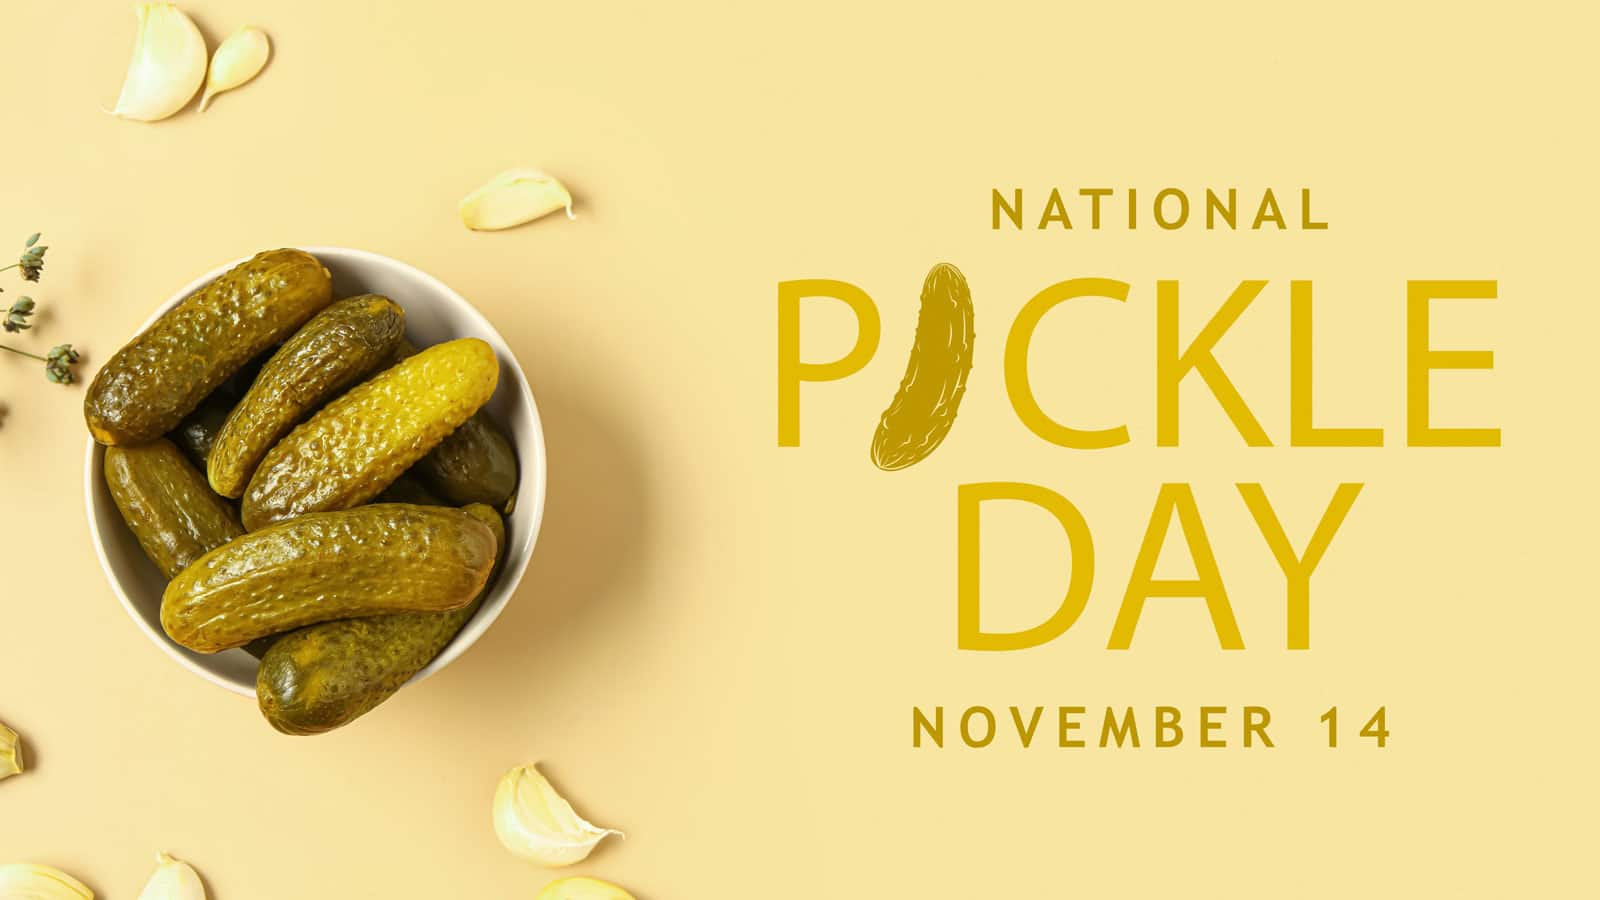 National Pickles day banner